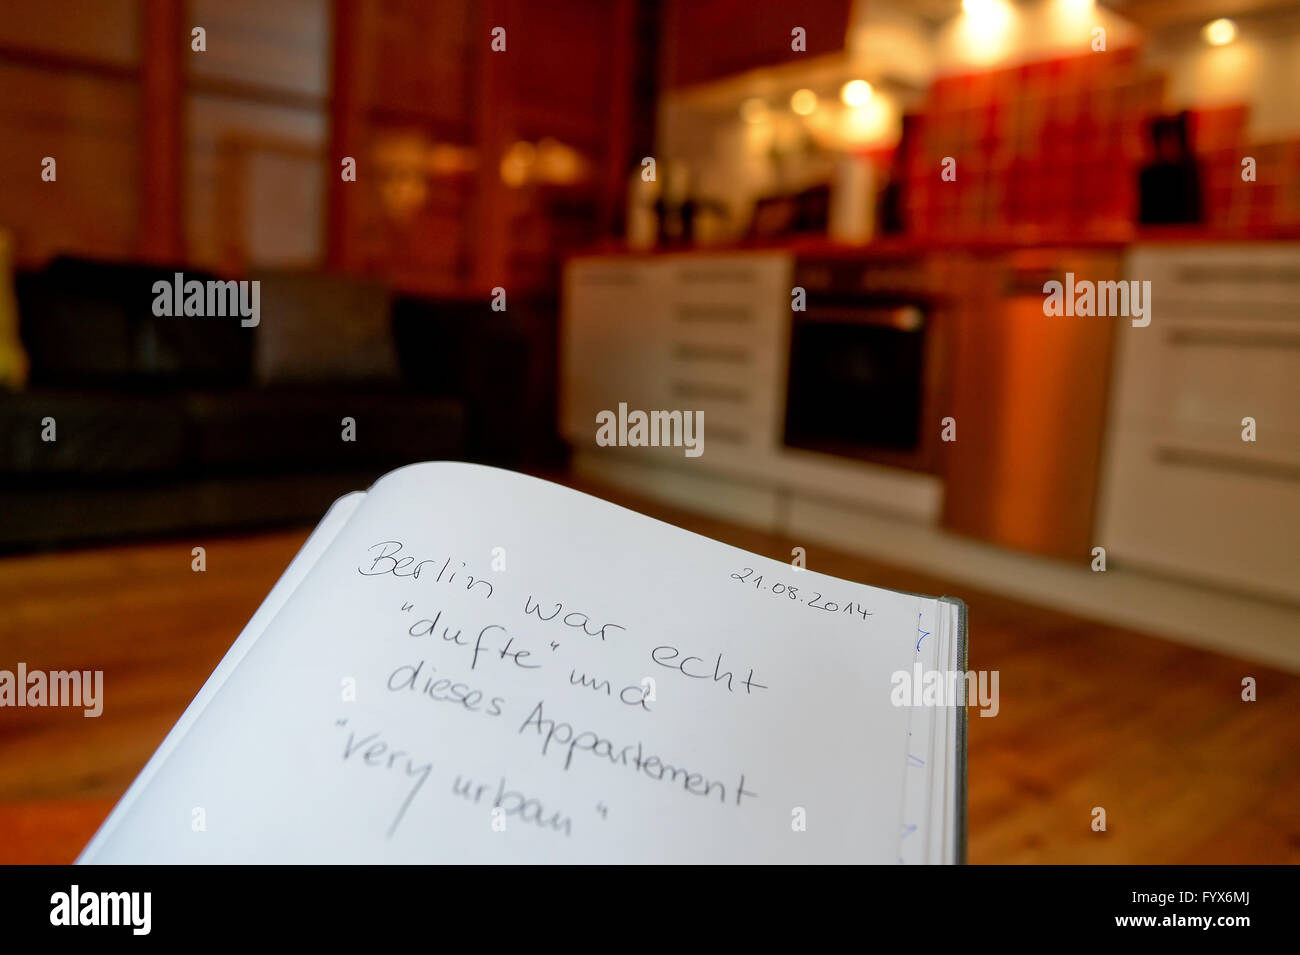 Berlin, Germany. 28th Apr, 2016. A guestbook of the holiday apartment 'Schmiede Harley' reads 'Berlin was really awesome and this apartment very urban' in Berlin, Germany, 28 April 2016. Photo: BRITTA PEDERSEN/dpa/Alamy Live News Stock Photo